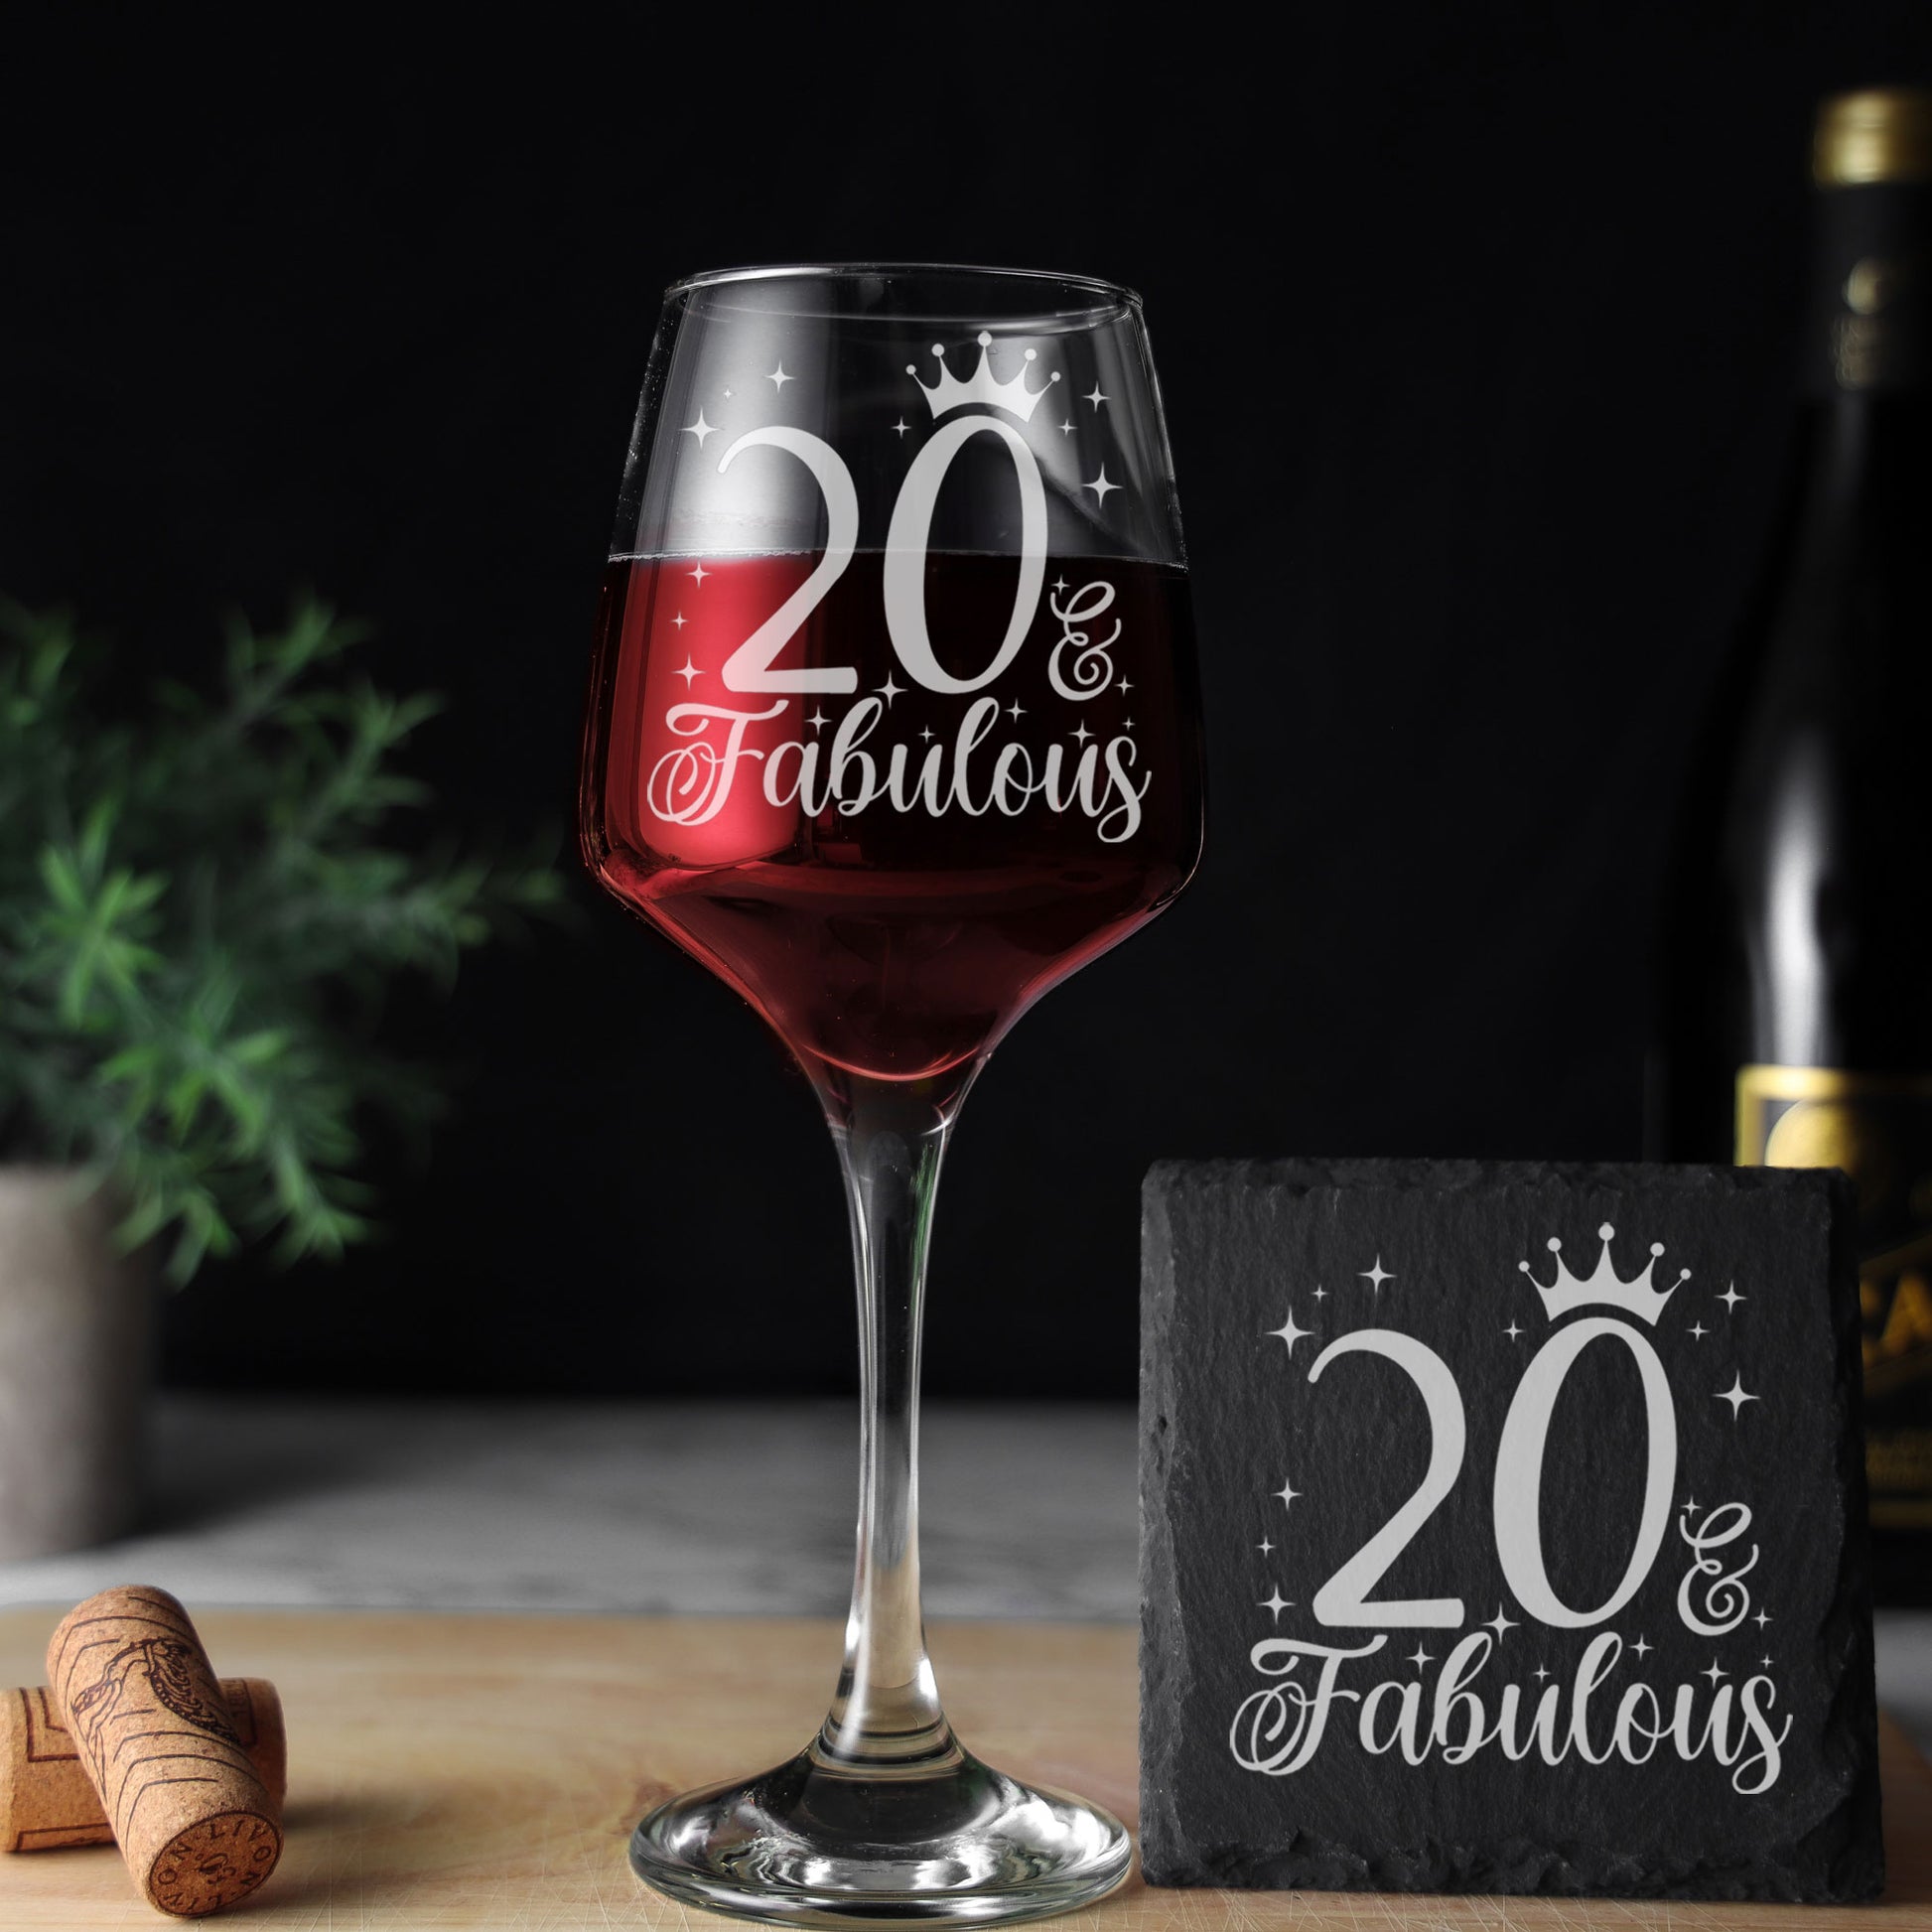 20 & Fabulous 20th Birthday Gift Engraved Wine Glass and/or Coaster Set  - Always Looking Good - Glass & Square Coaster  